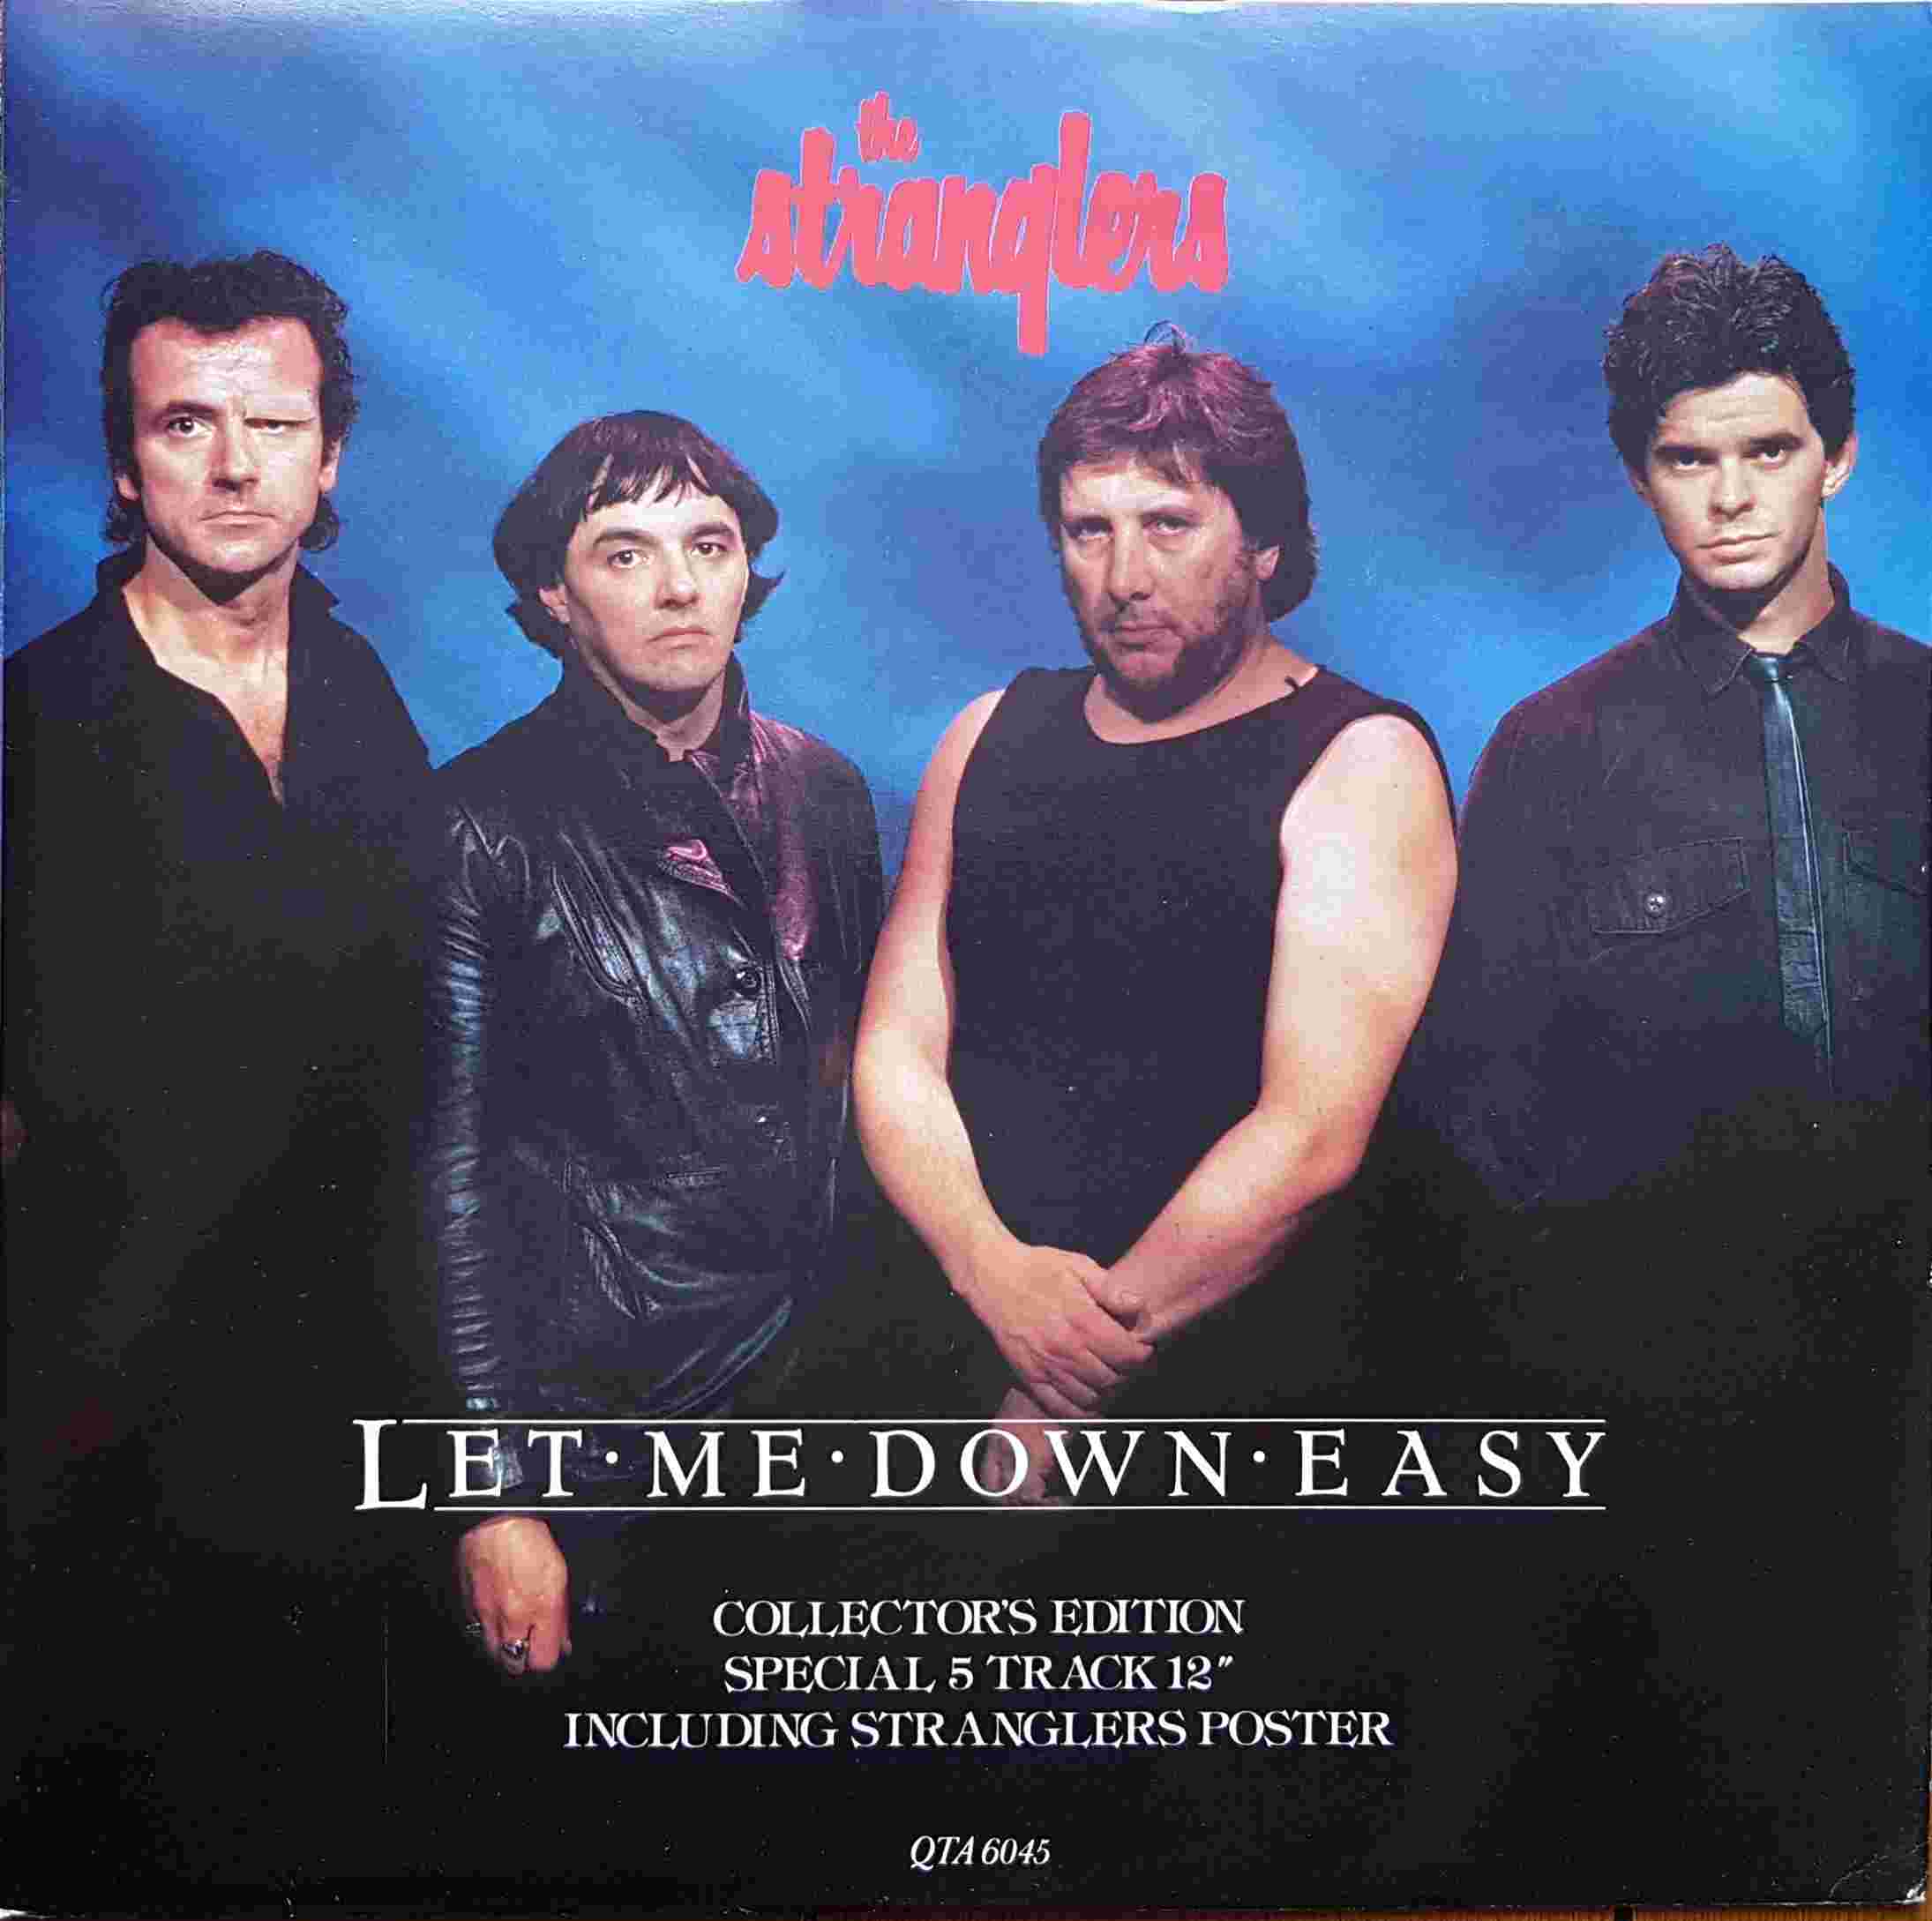 Picture of Let me down easy by artist The Stranglers from The Stranglers 12inches